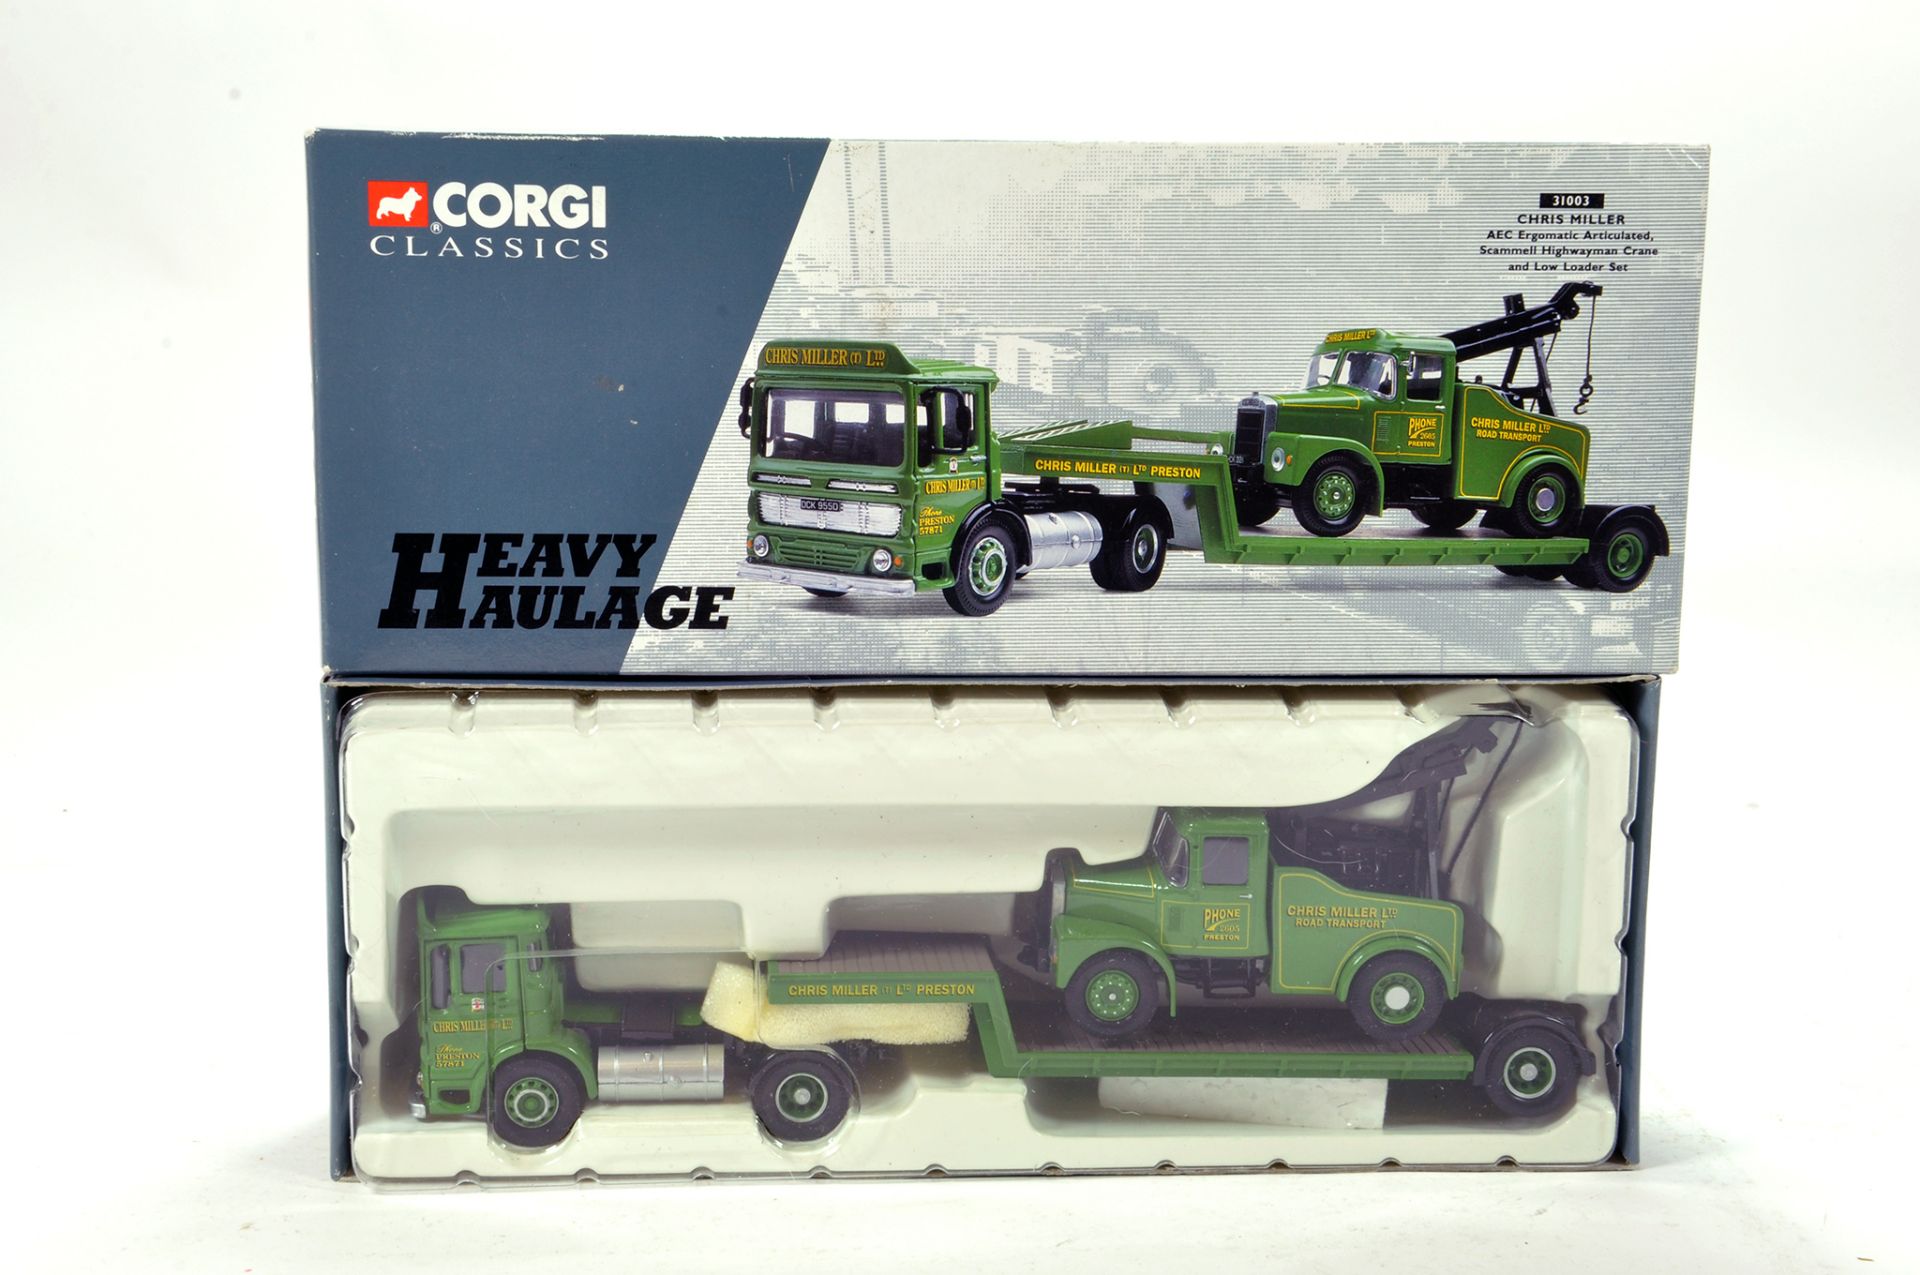 Corgi 1/50 diecast truck issue comprising No. 31003 AEC Low Loader and Scammell Breakdown in